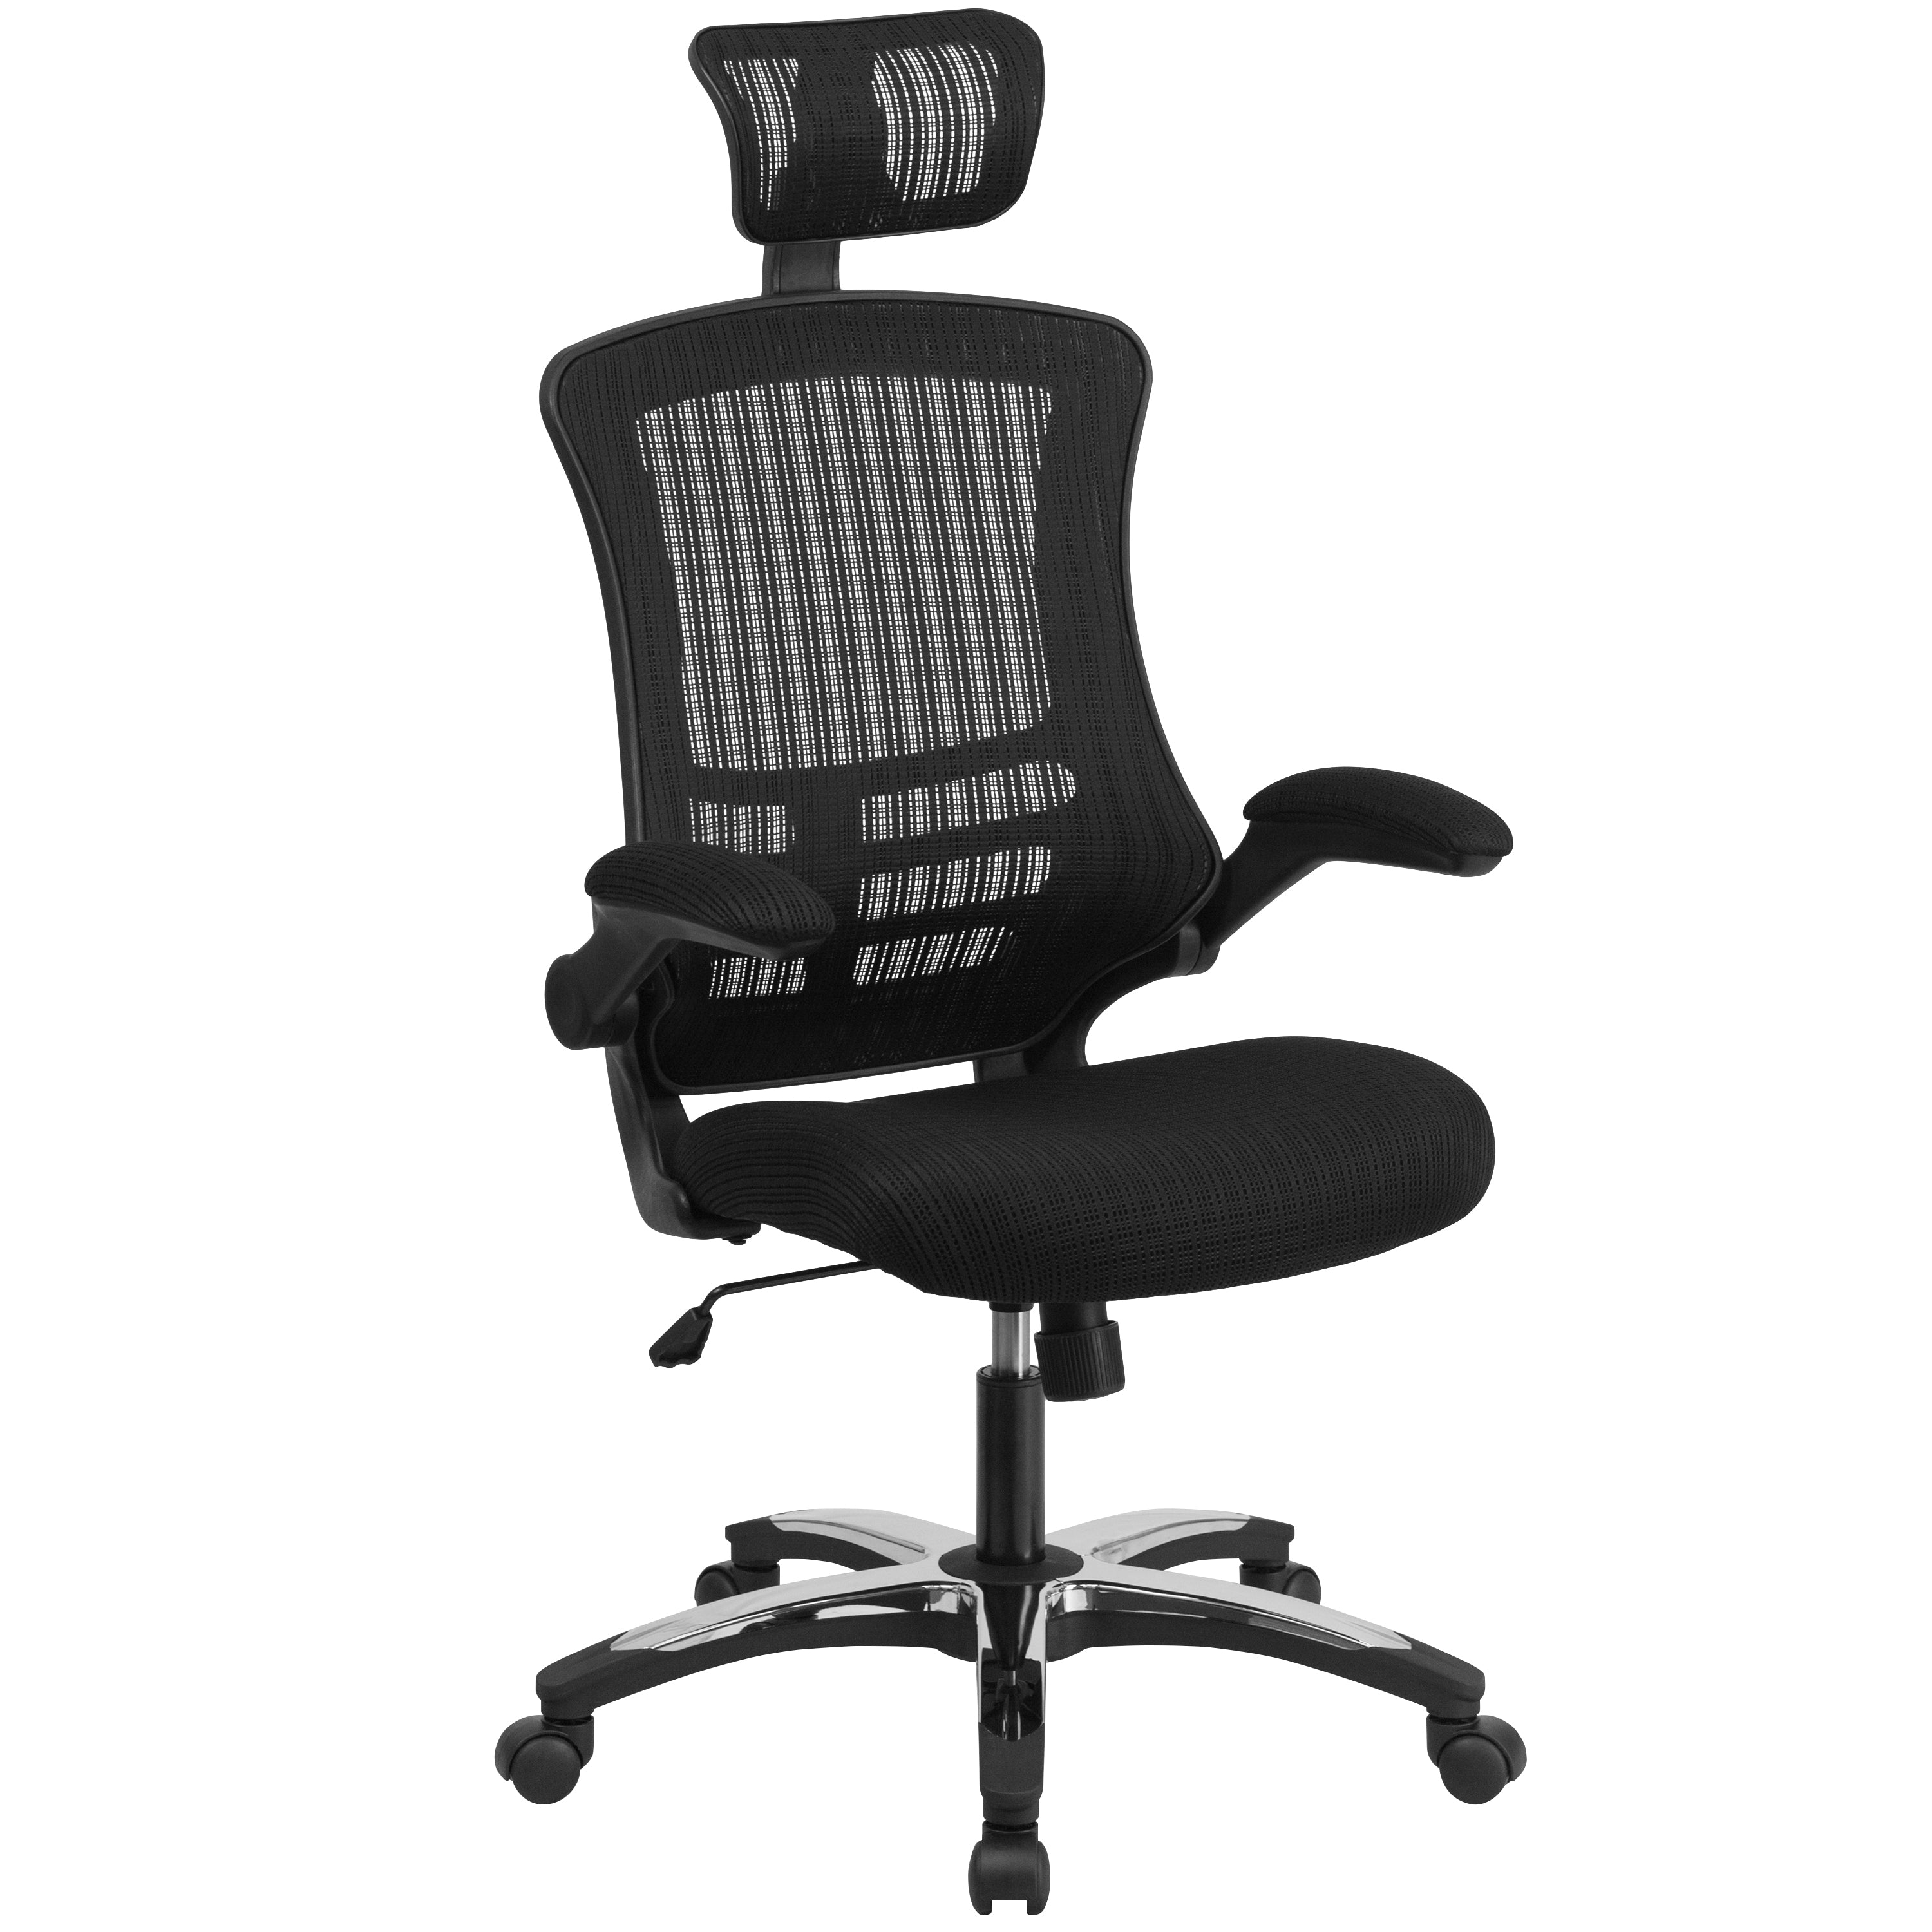 High-Back Black Mesh Swivel Ergonomic Executive Office Chair with Flip-Up Arms and Adjustable Headrest-Office Chair-Flash Furniture-Wall2Wall Furnishings